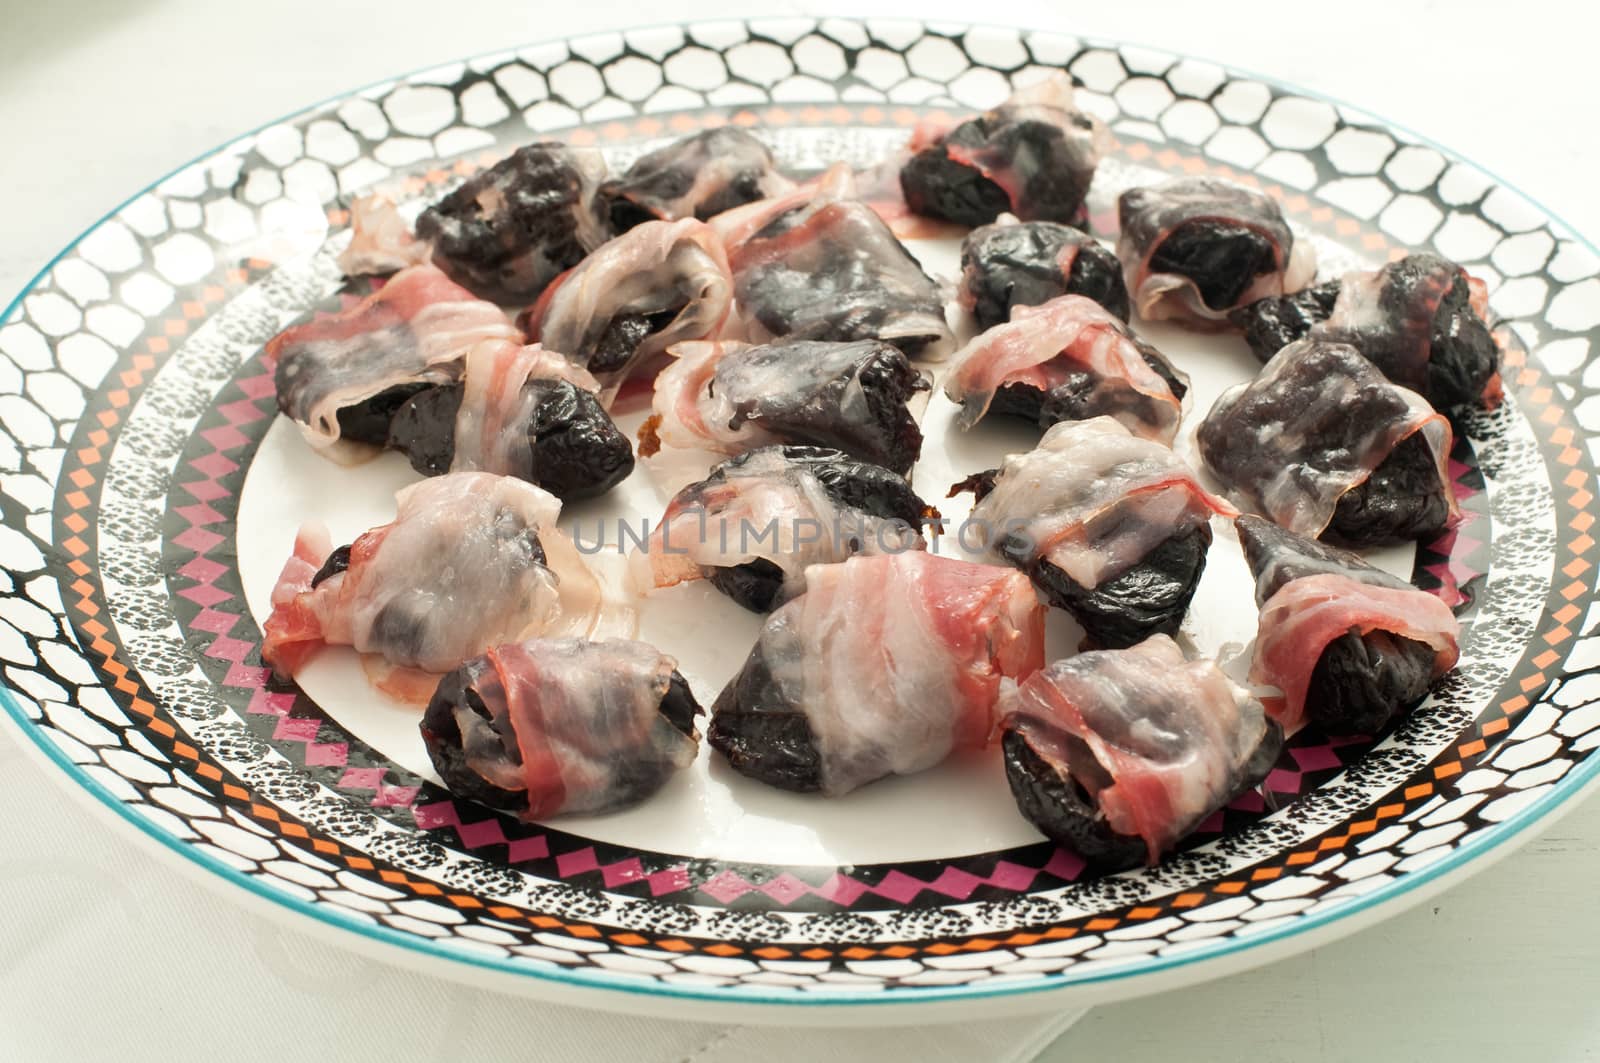 Prunes wrapped in bacon and baked, italy